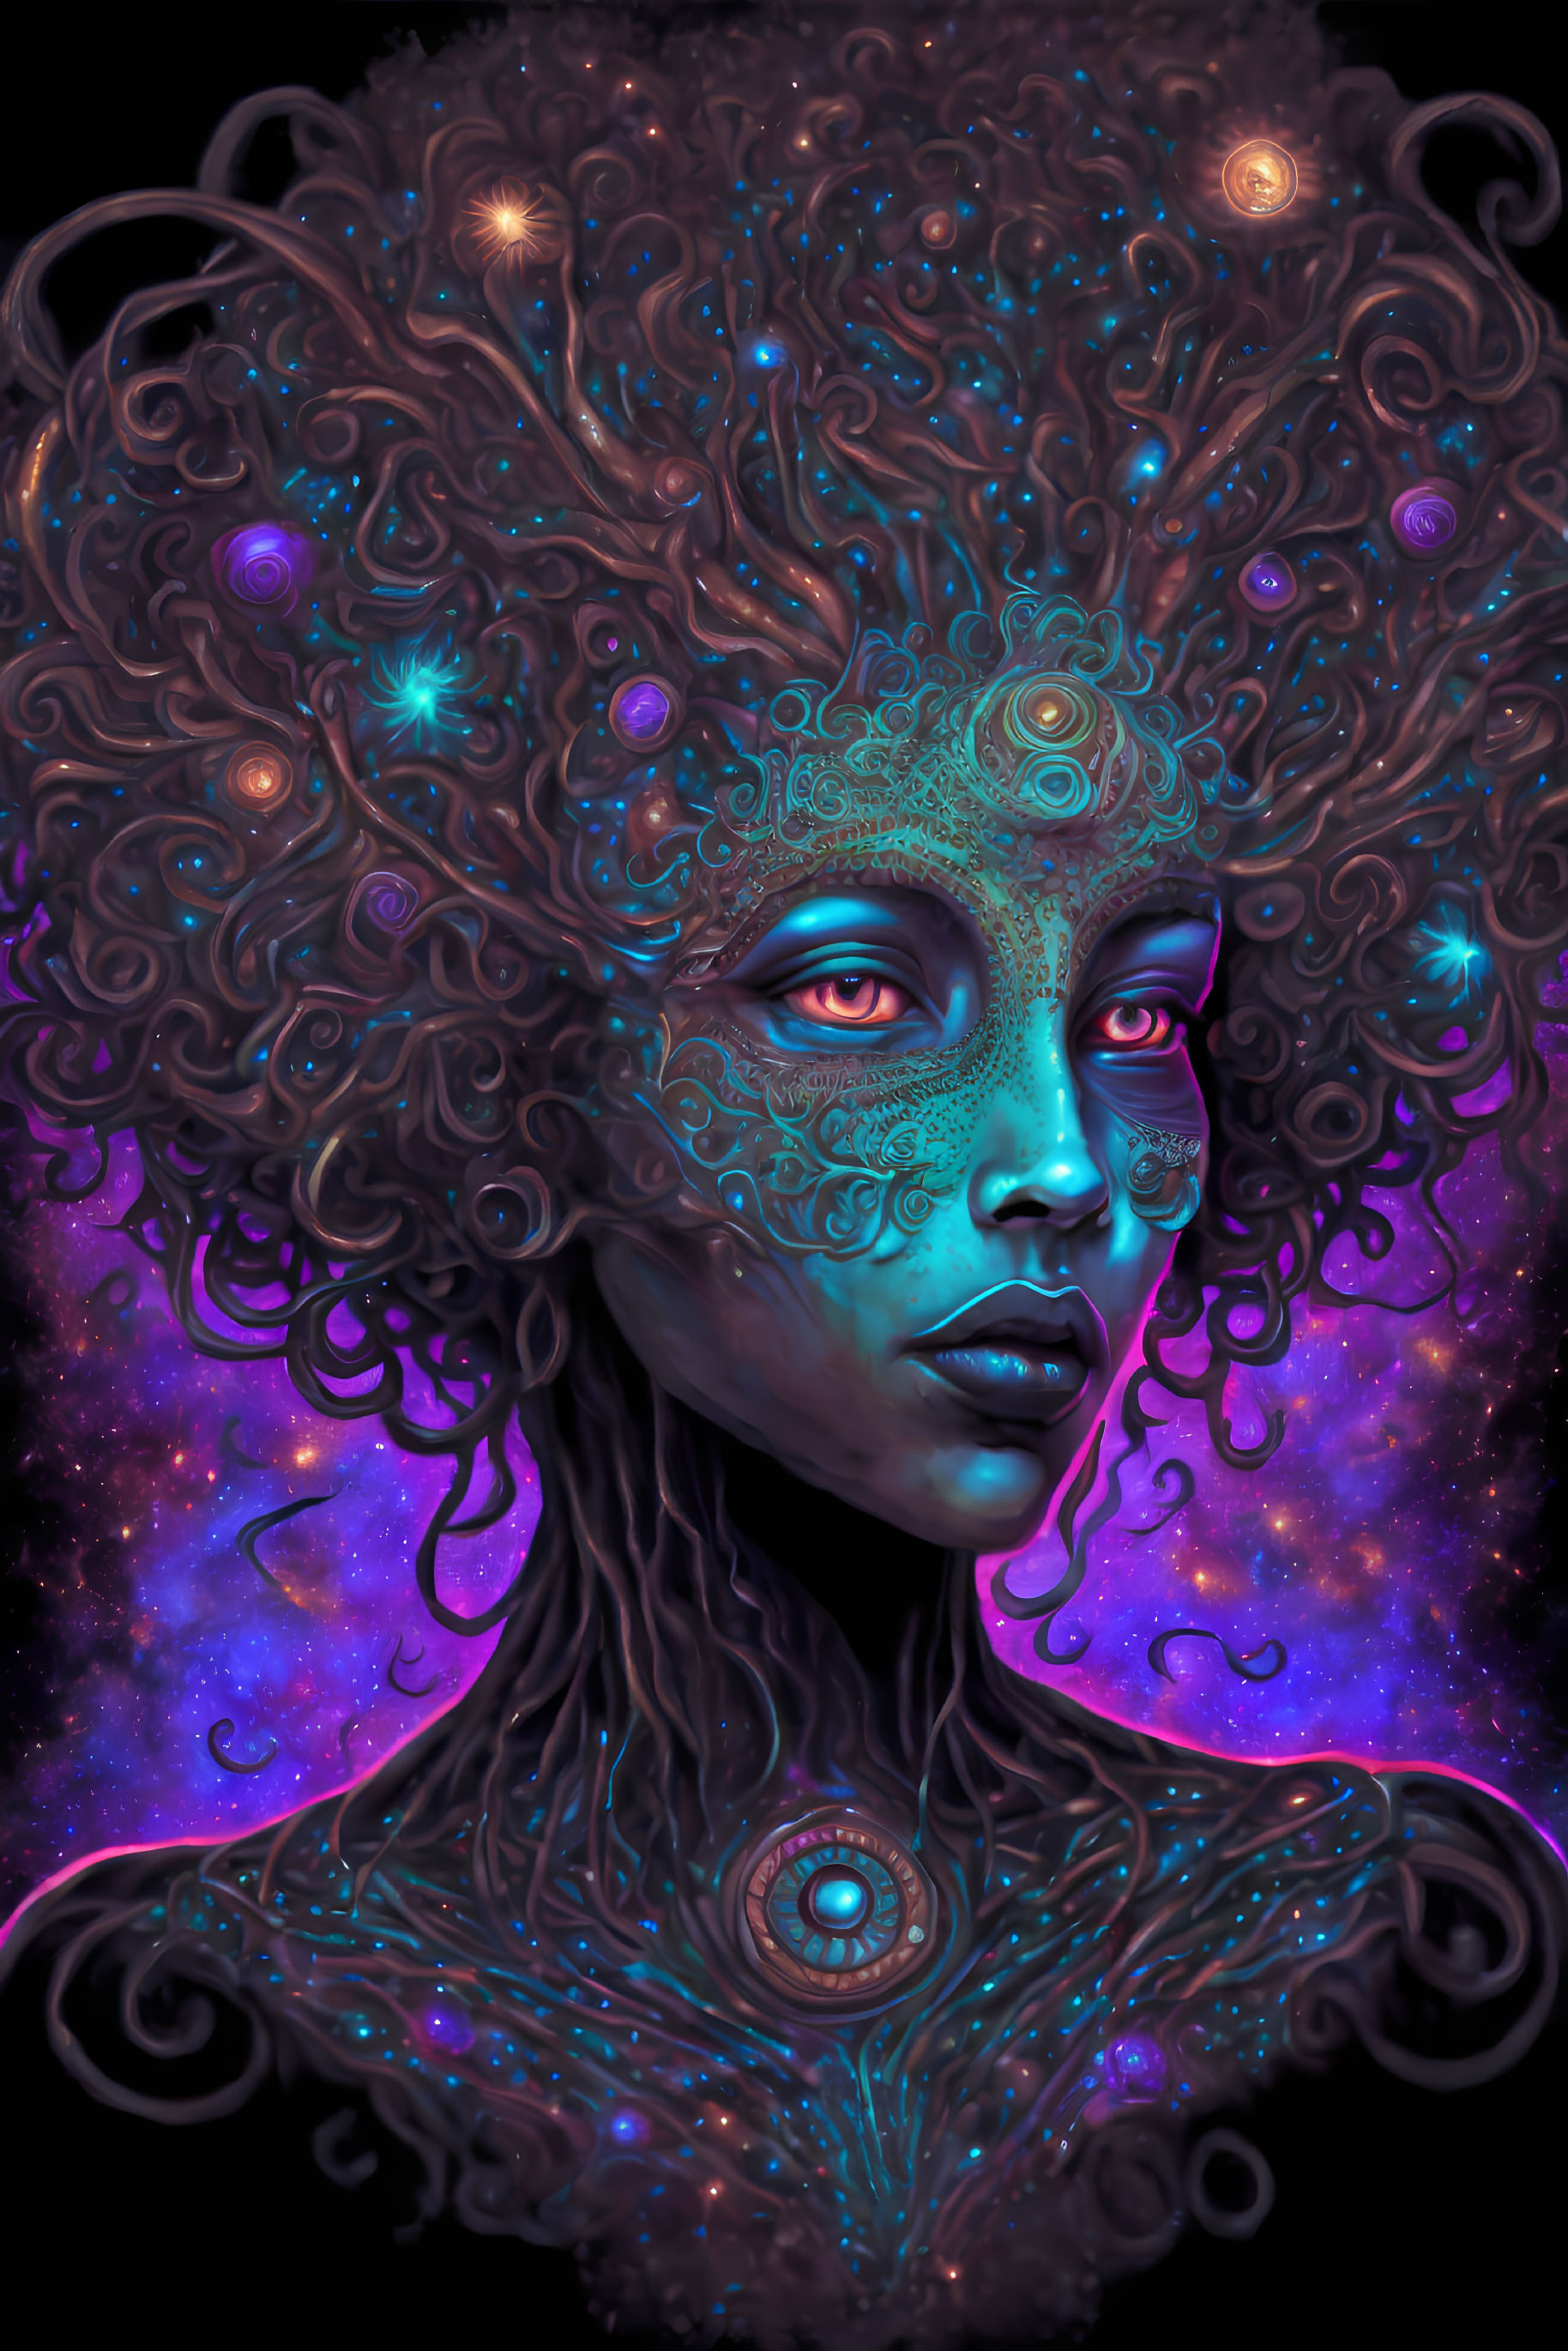 Colorful digital artwork: Cosmic entity with star-filled hair and glowing orbs.